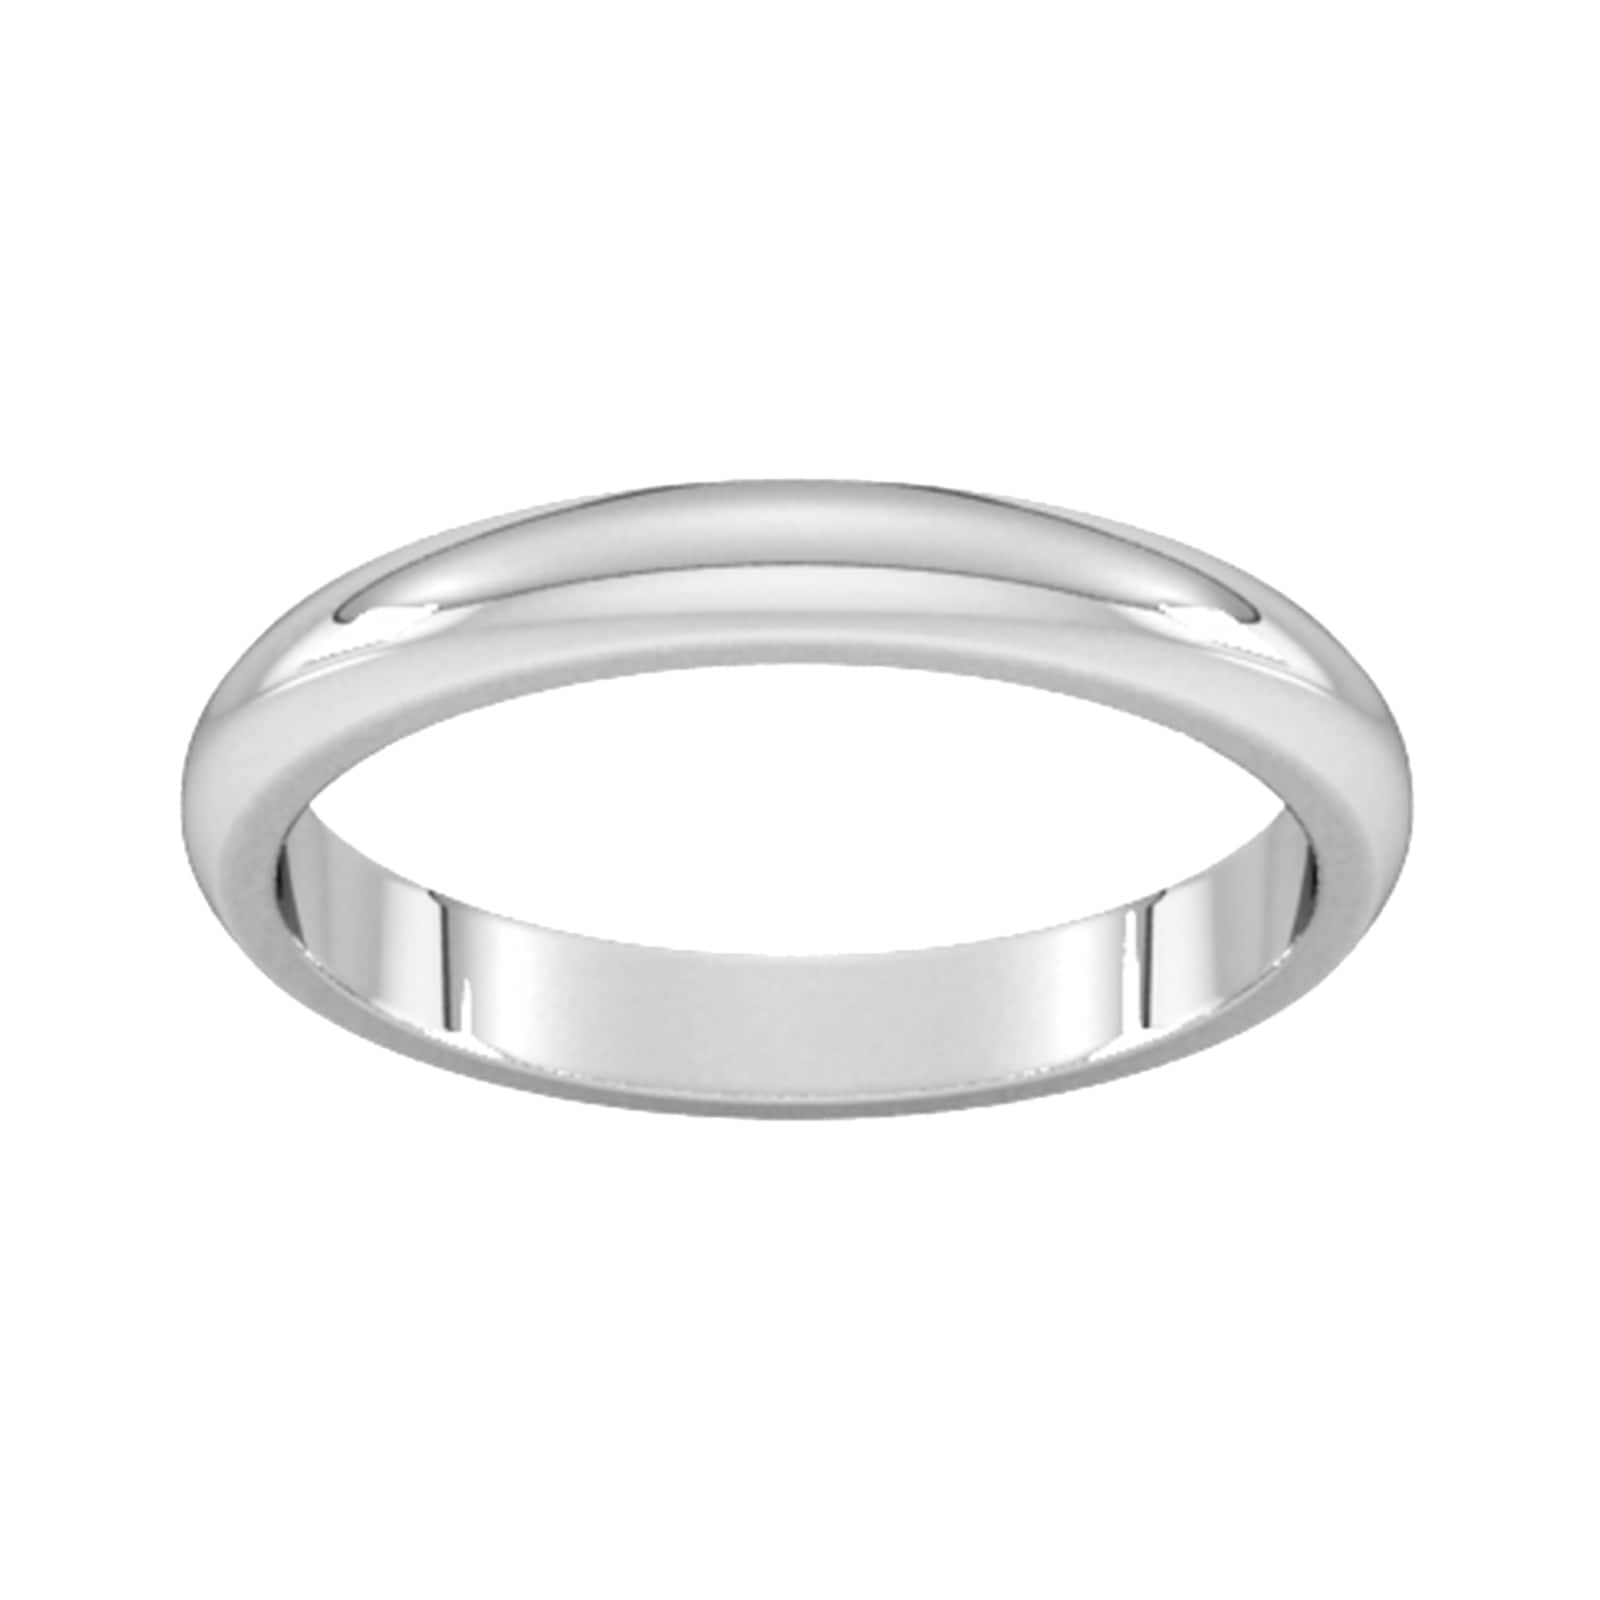 3mm D Shape Heavy Wedding Ring In Sterling Silver - Ring Size N